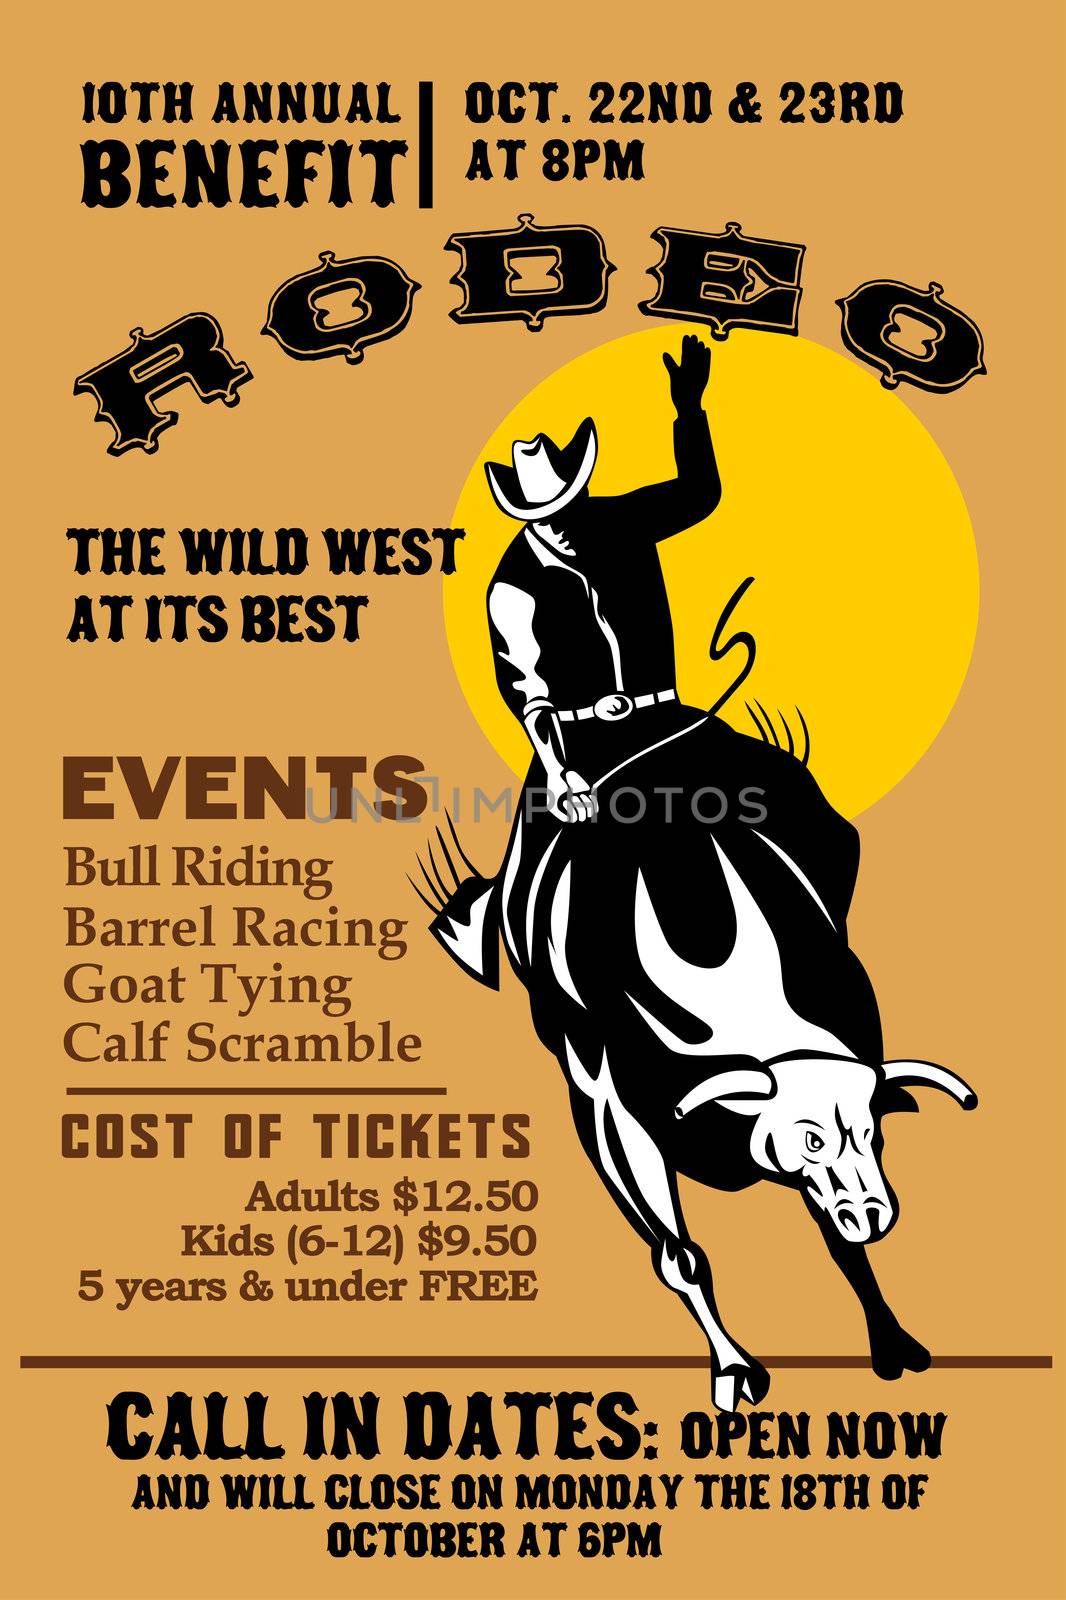 retro style illustration of a Poster showing an American  Rodeo Cowboy riding  a bull bucking jumping with sun in background and words  "Annual Benefit Rodeo "